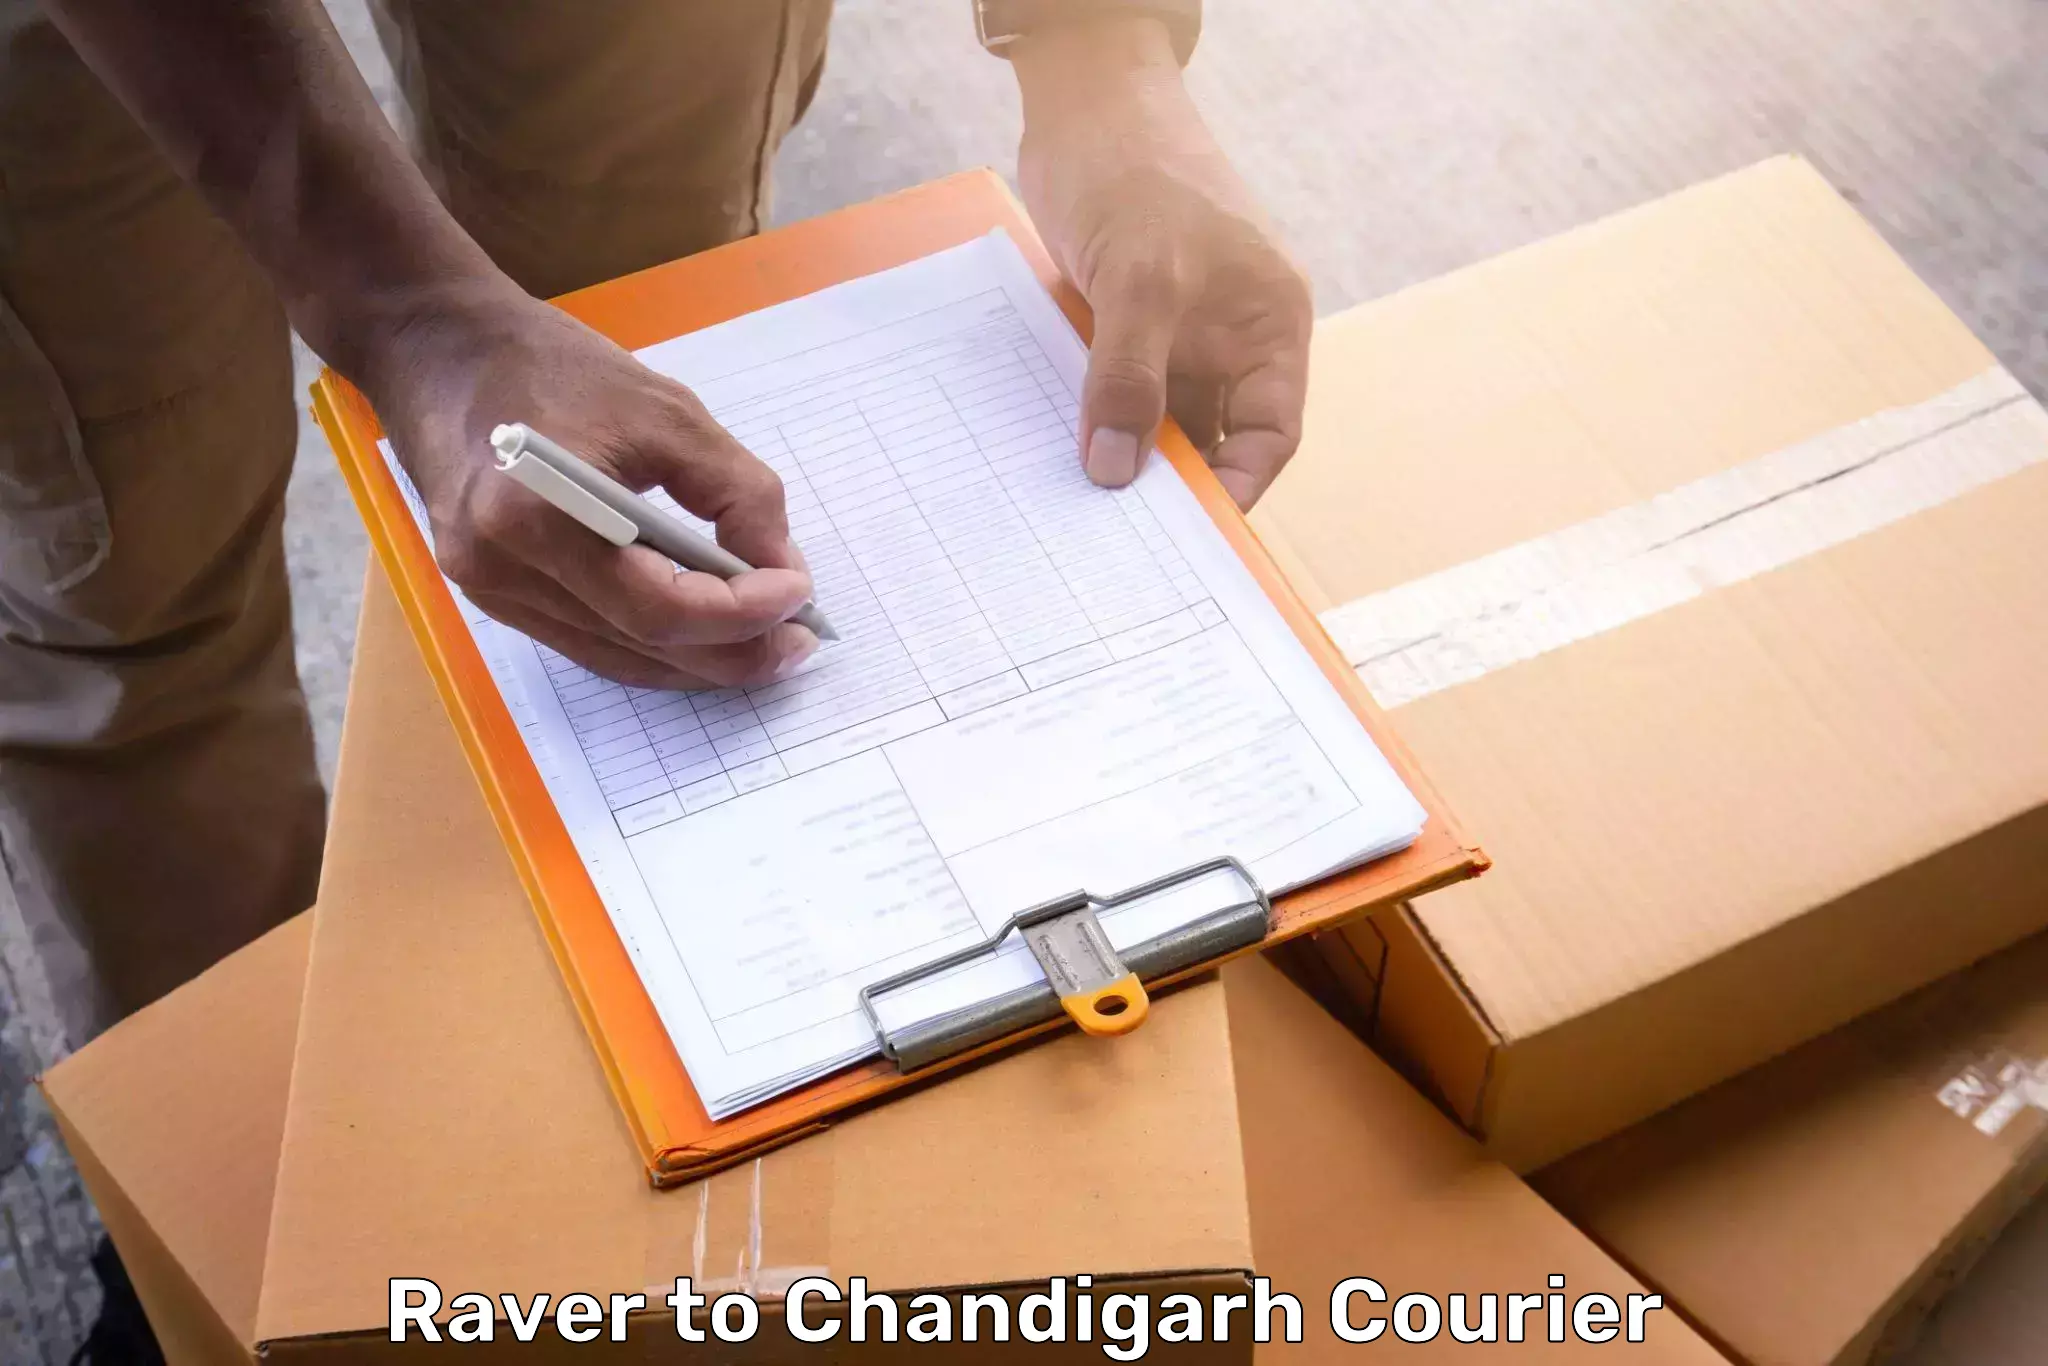 Luggage transport solutions Raver to Chandigarh